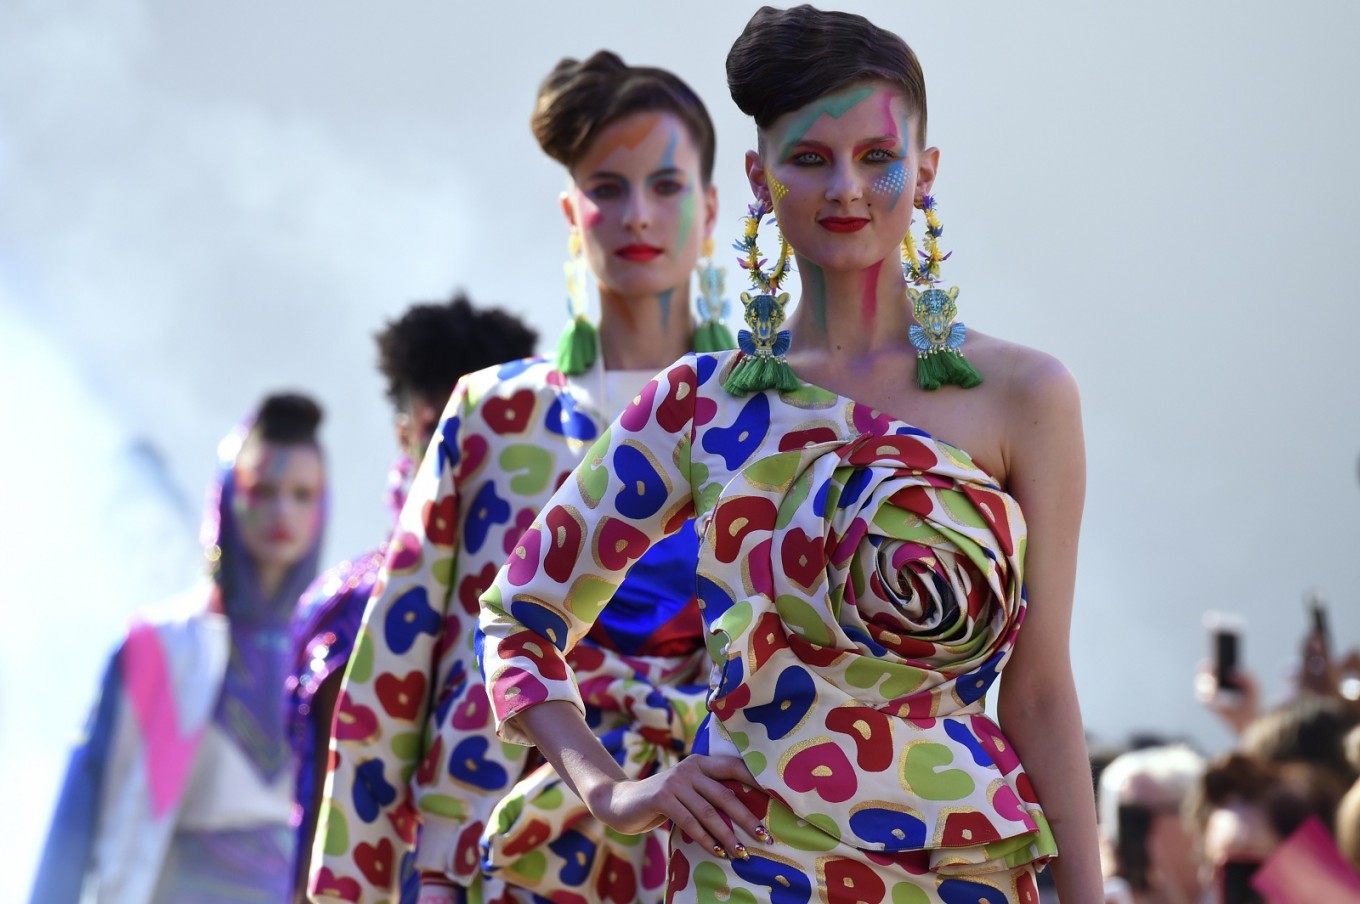 Paris fashion week to go ahead in September - Lifestyle - The Jakarta Post